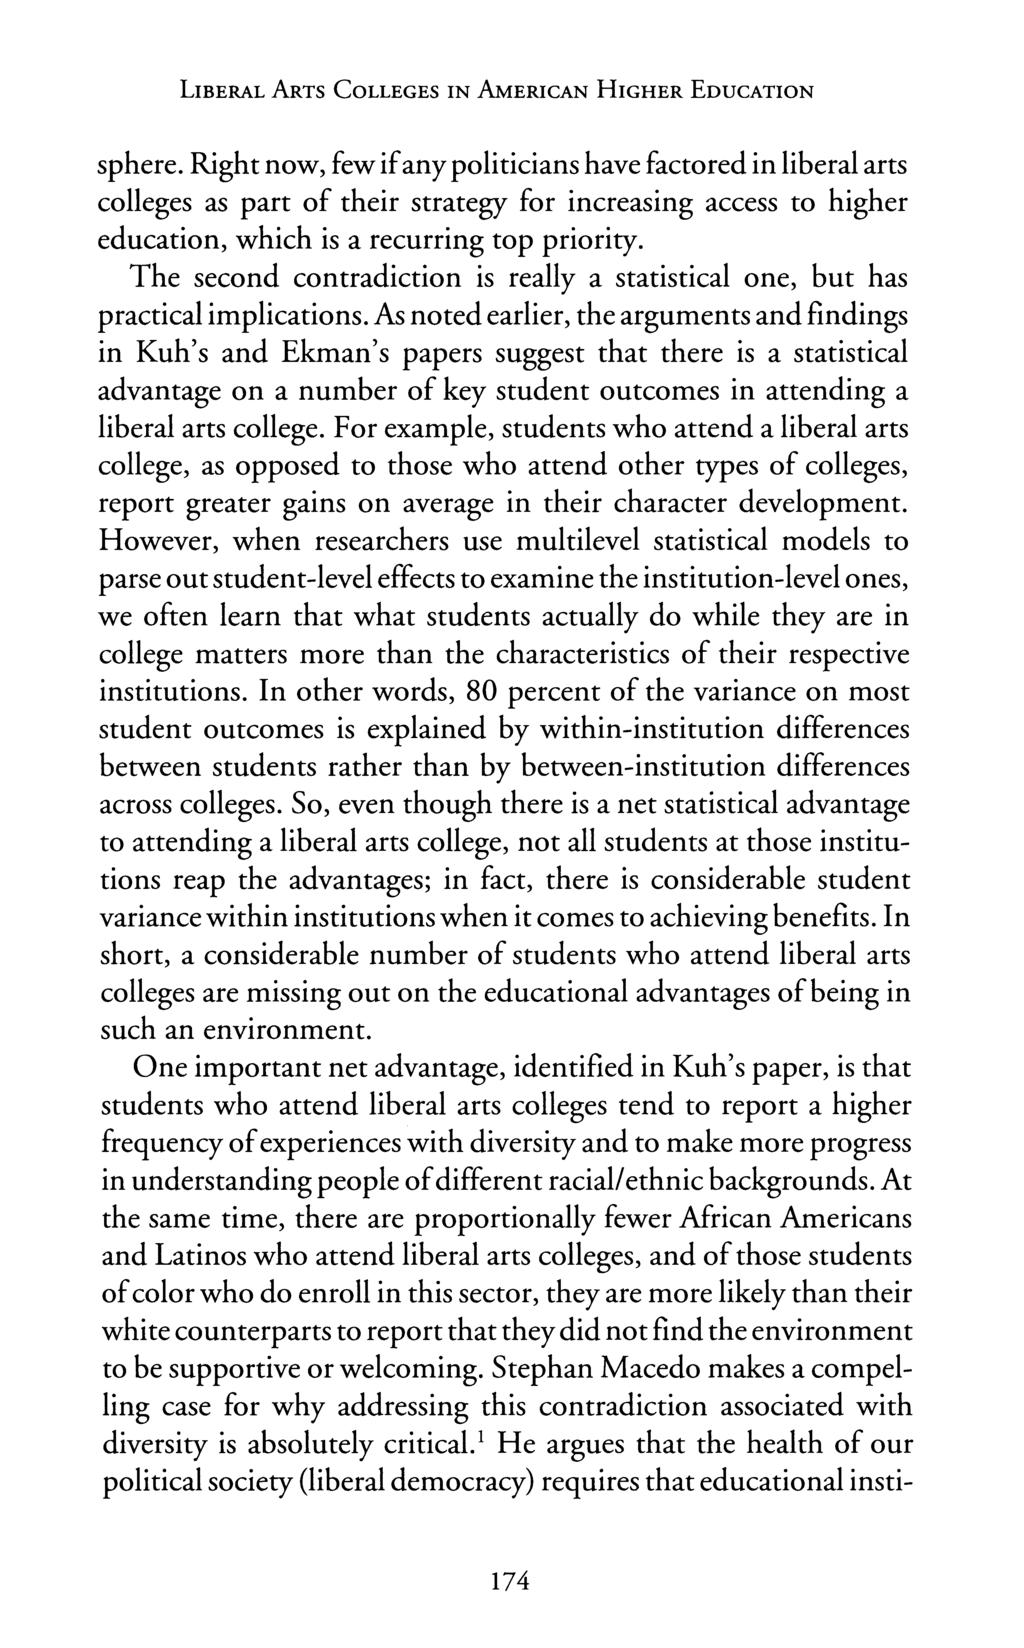 LIBERAL ARTS COLLEGES IN AMERICAN HIGHER EDUCATION sphere.